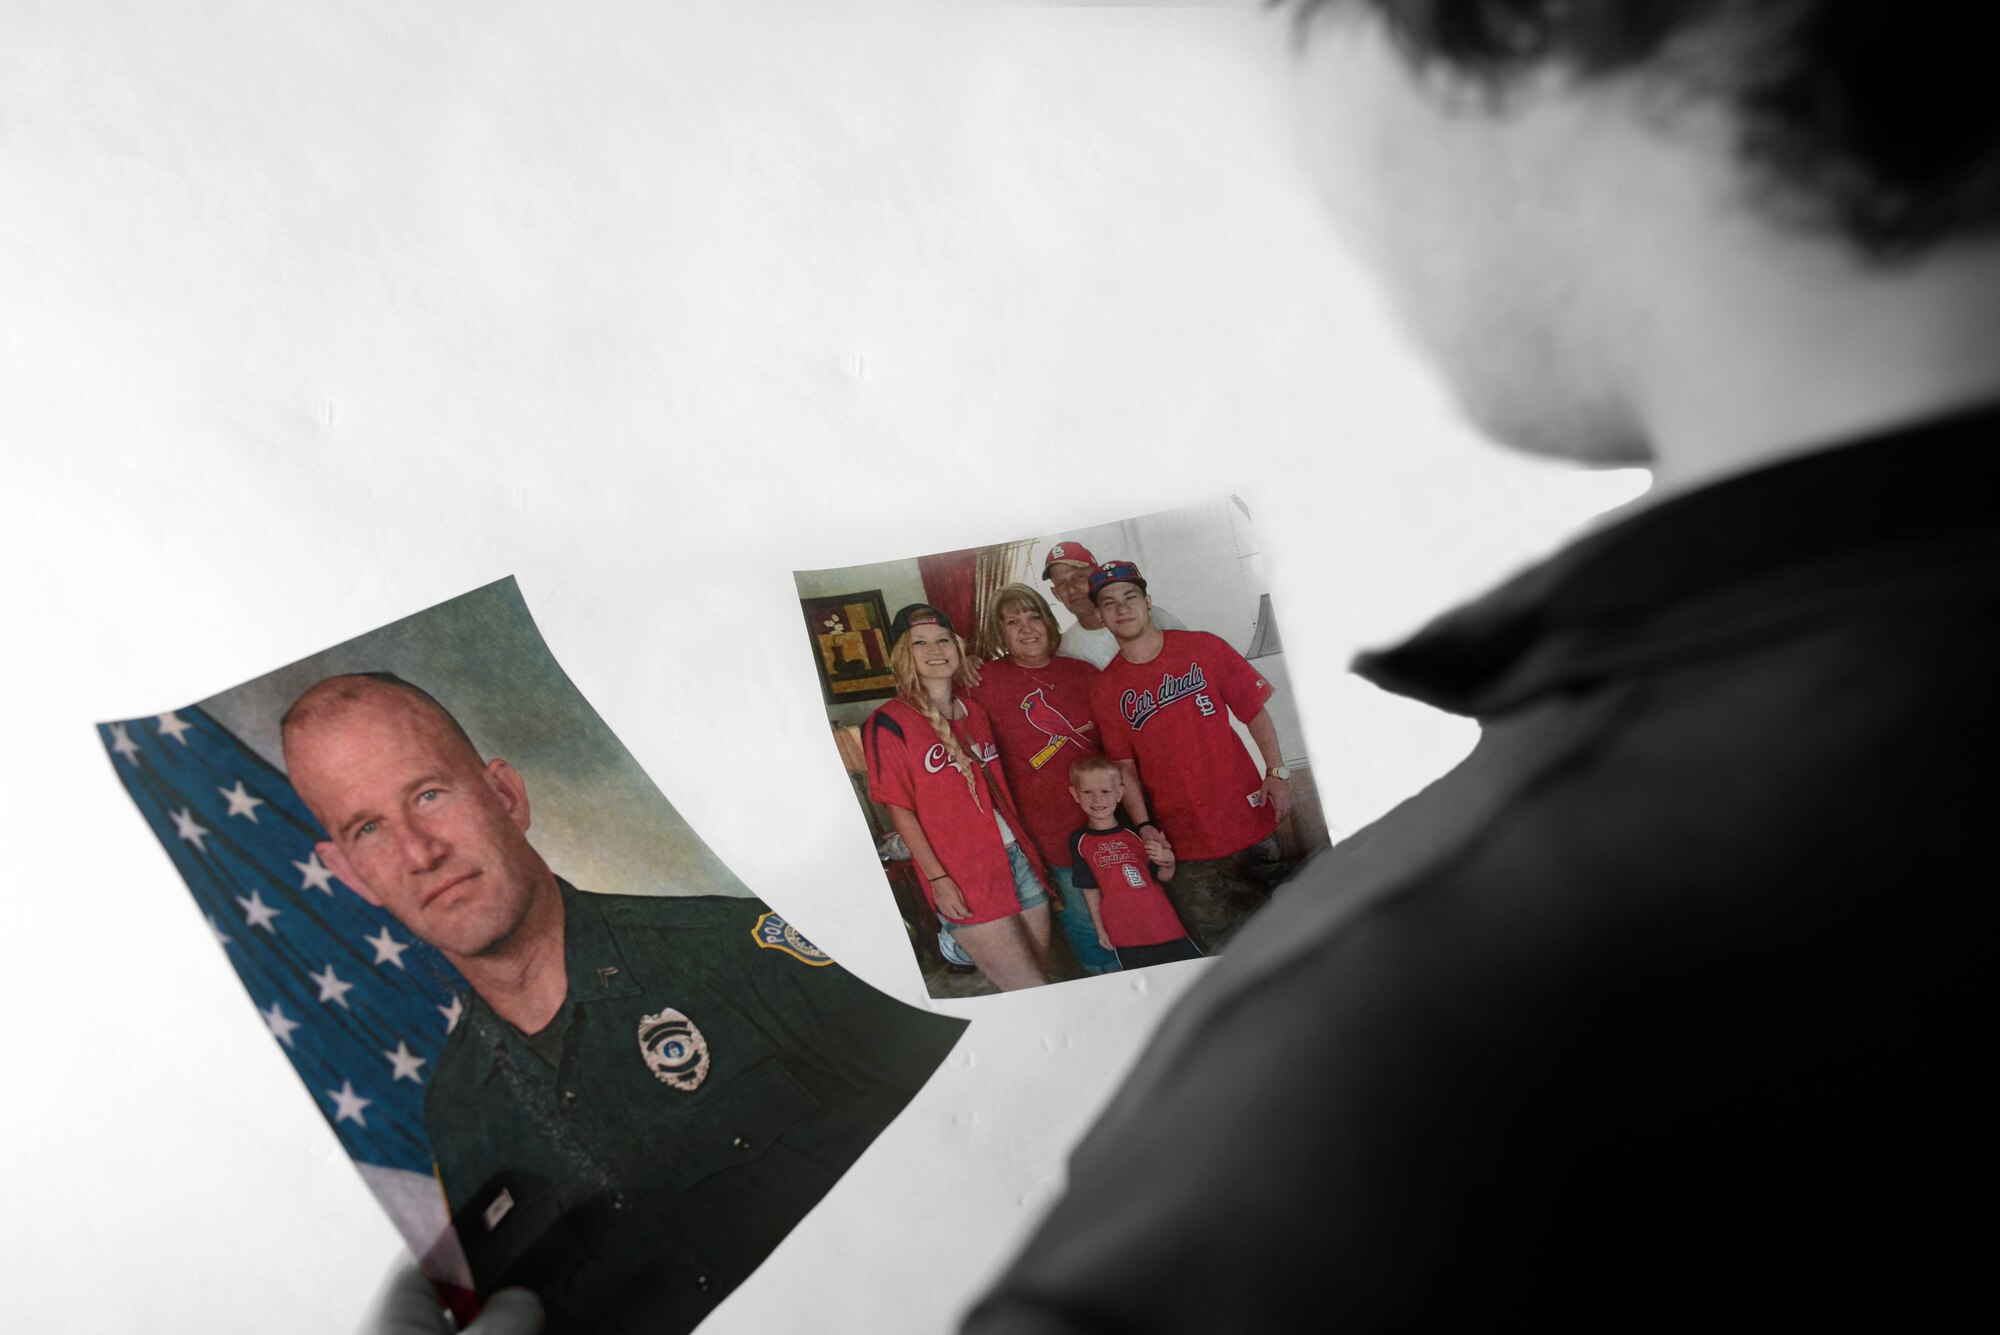 Zach Donnelly, son of the late Dave Donnelly, holds photos of his father and his family at Ellsworth Air Force Base, S.D., Nov. 4, 2016. Donnelly’s father passed away on Oct. 15 after a long battle with cancer. Prior to becoming a police officer with the Department of the Air Force, Dave served 10 years in the U.S. Army. (U.S. Air Force photo illustration by Airman 1st Class Denise M. Jenson)